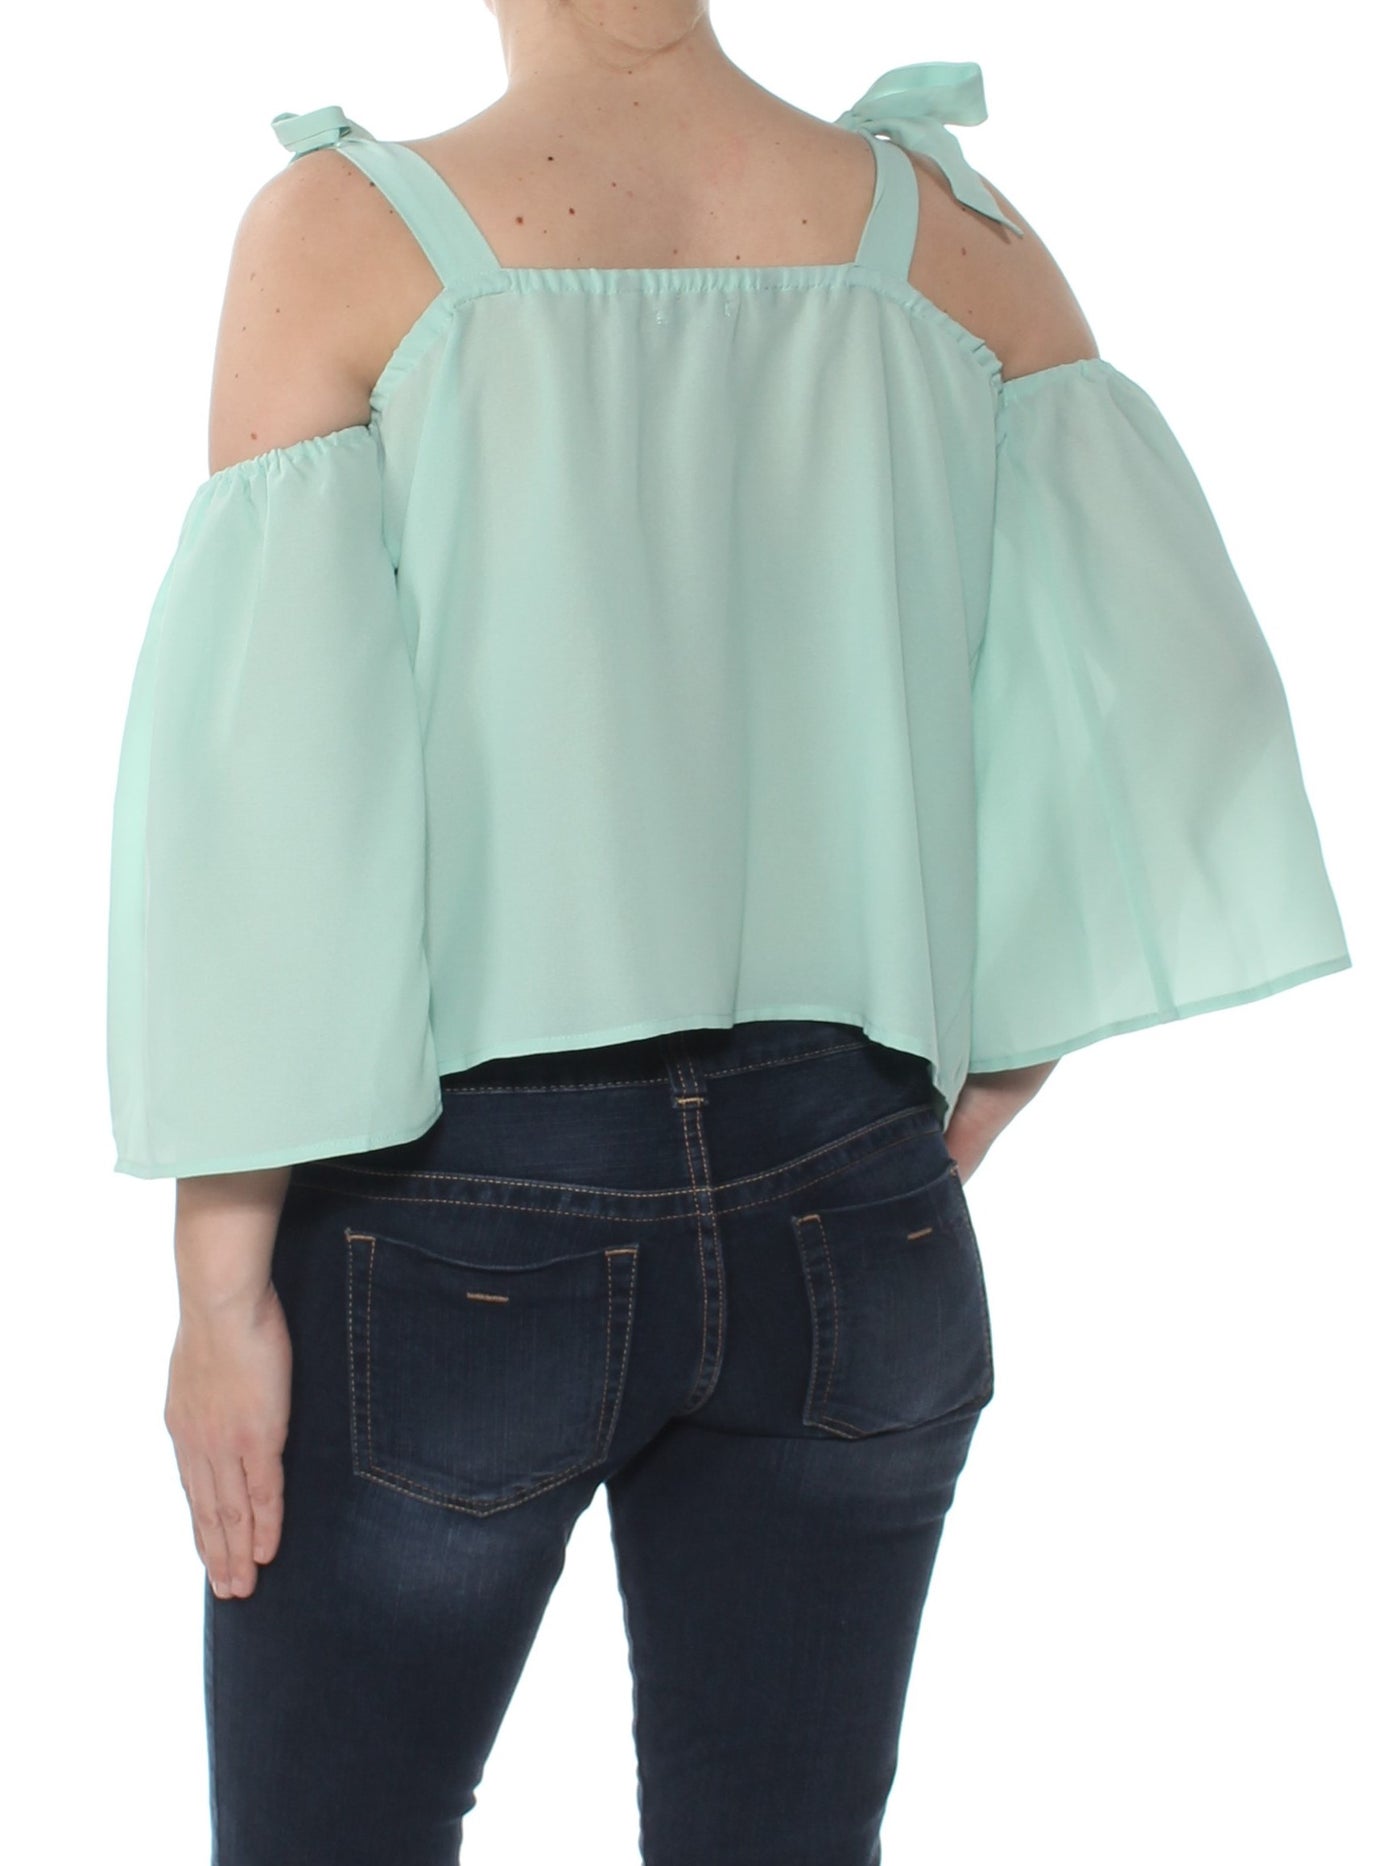 BUFFALO Womens Teal Cold Shoulder Bell Sleeve Square Neck Top